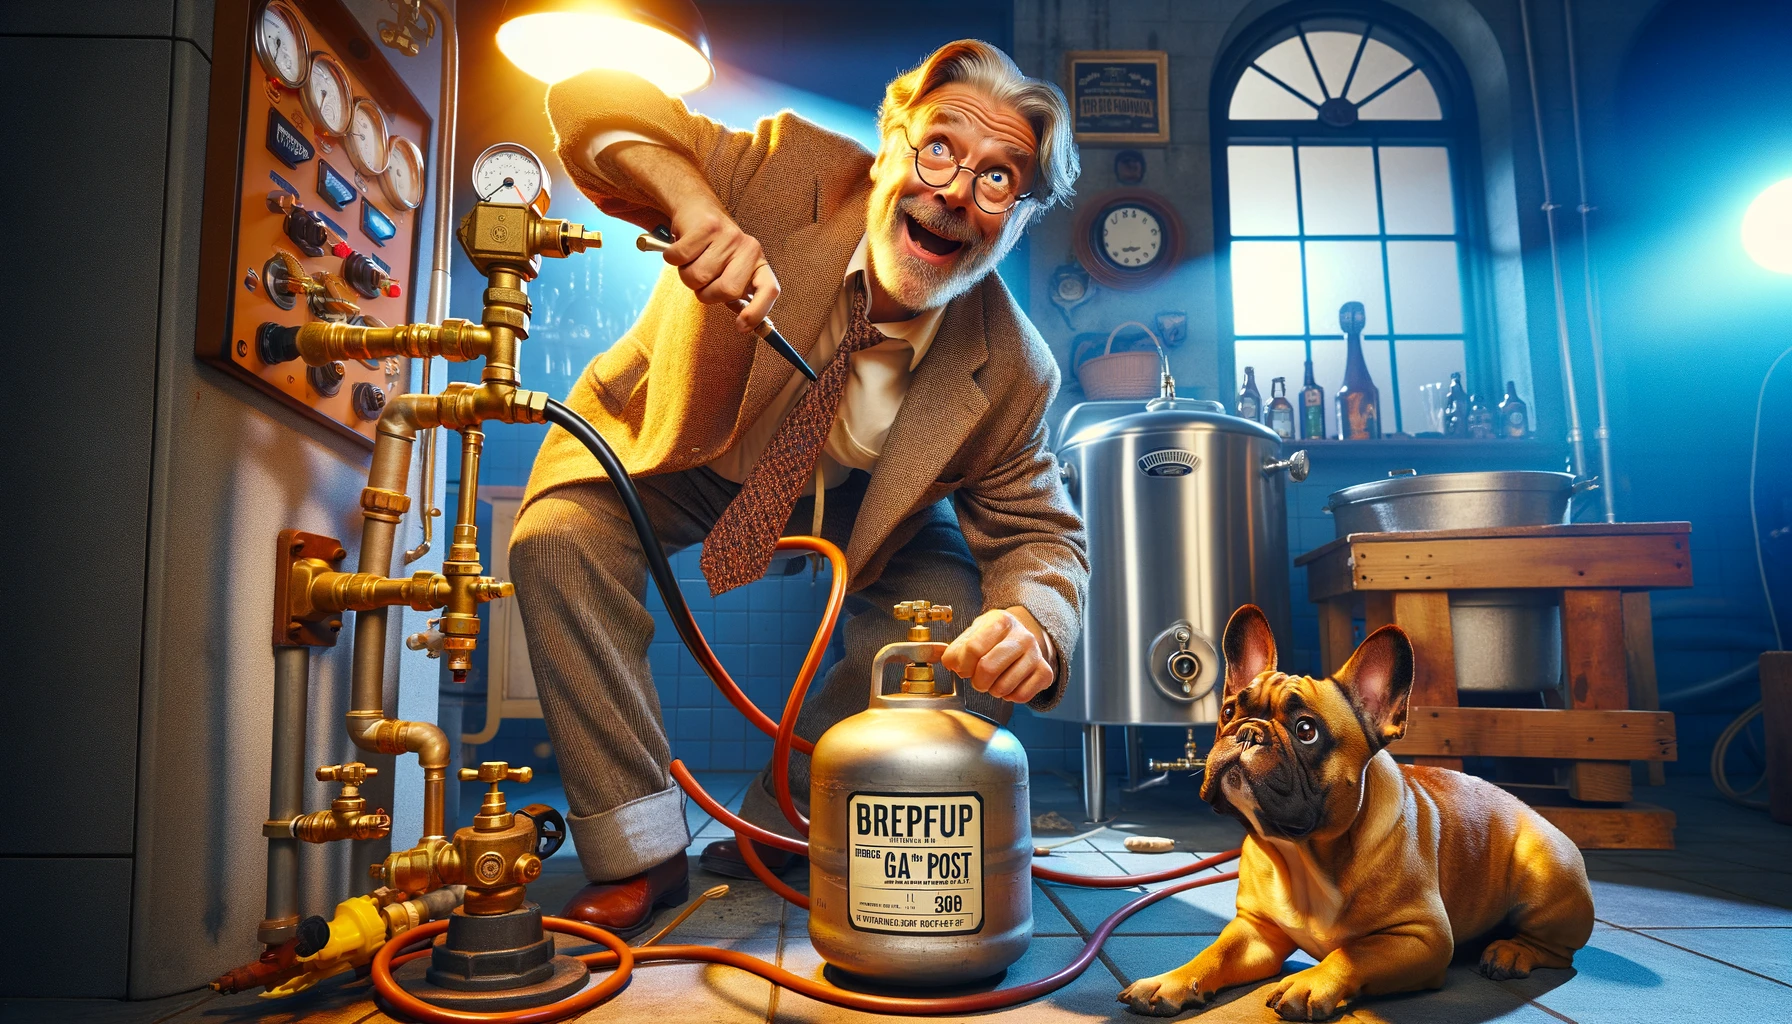 An image depicting the humorous moment of a brewing mishap, where Dr. Hans accidentally connects the gas post incorrectly, leading to a minor crisis.